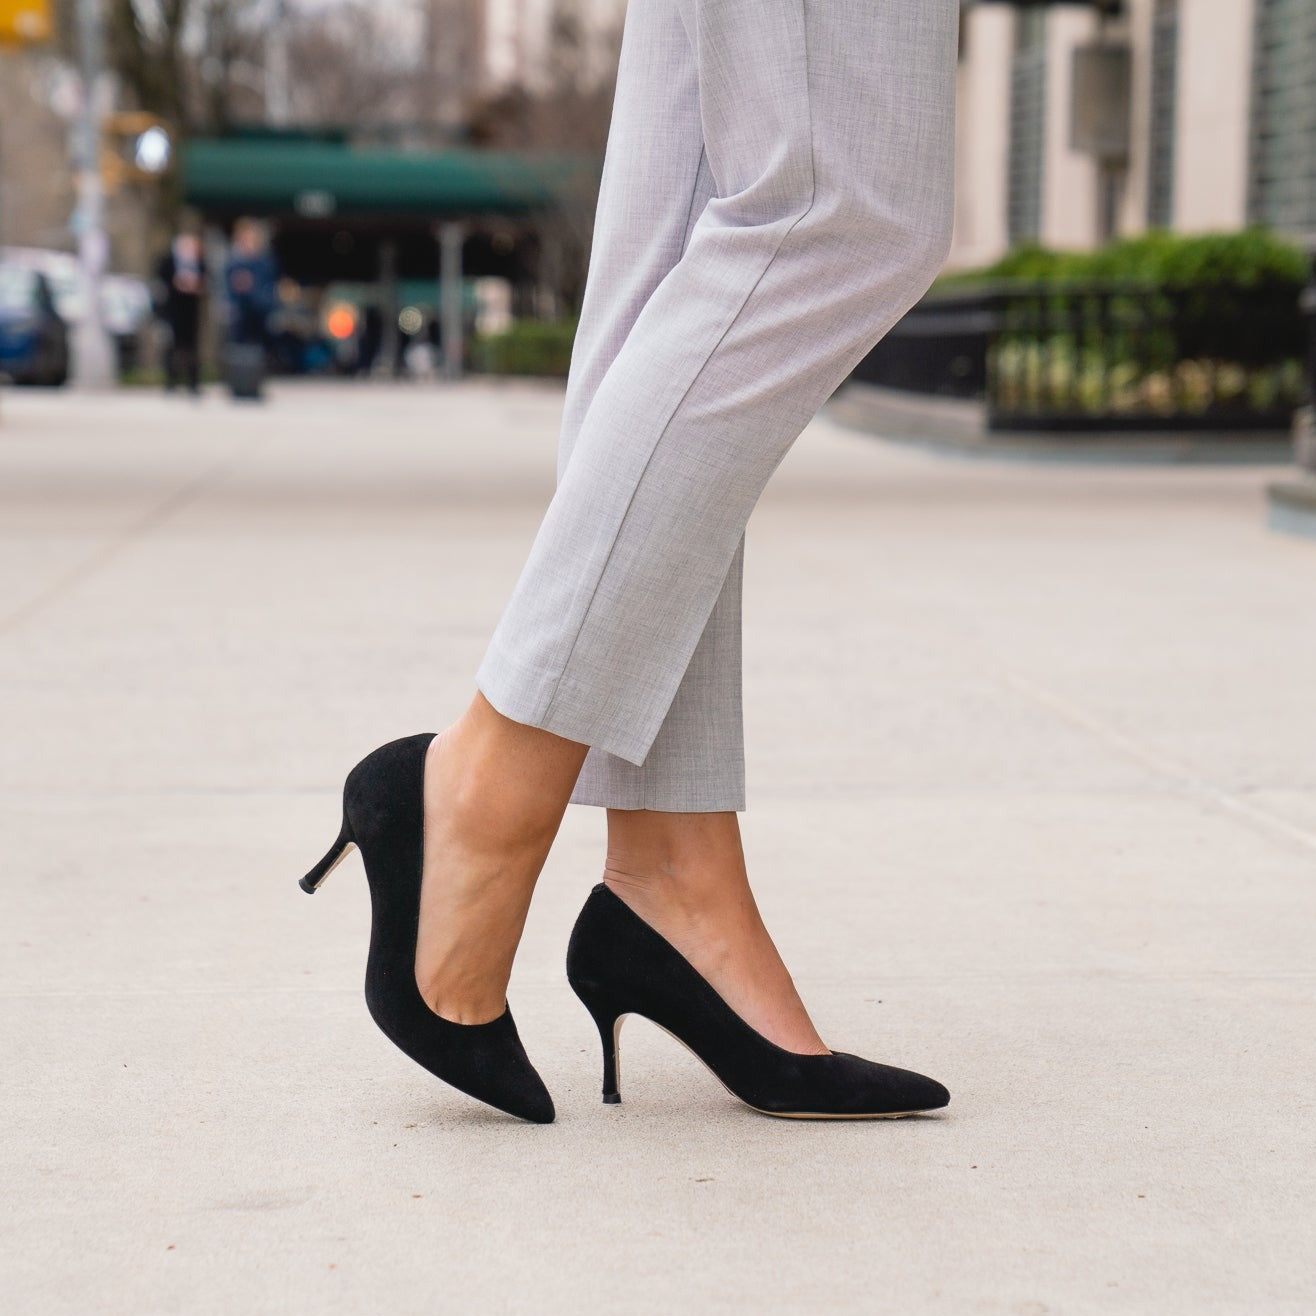 Black Pumps Outfit Ideas - High Heels Shopping Guide | Black pump shoes,  Heels, Black pumps